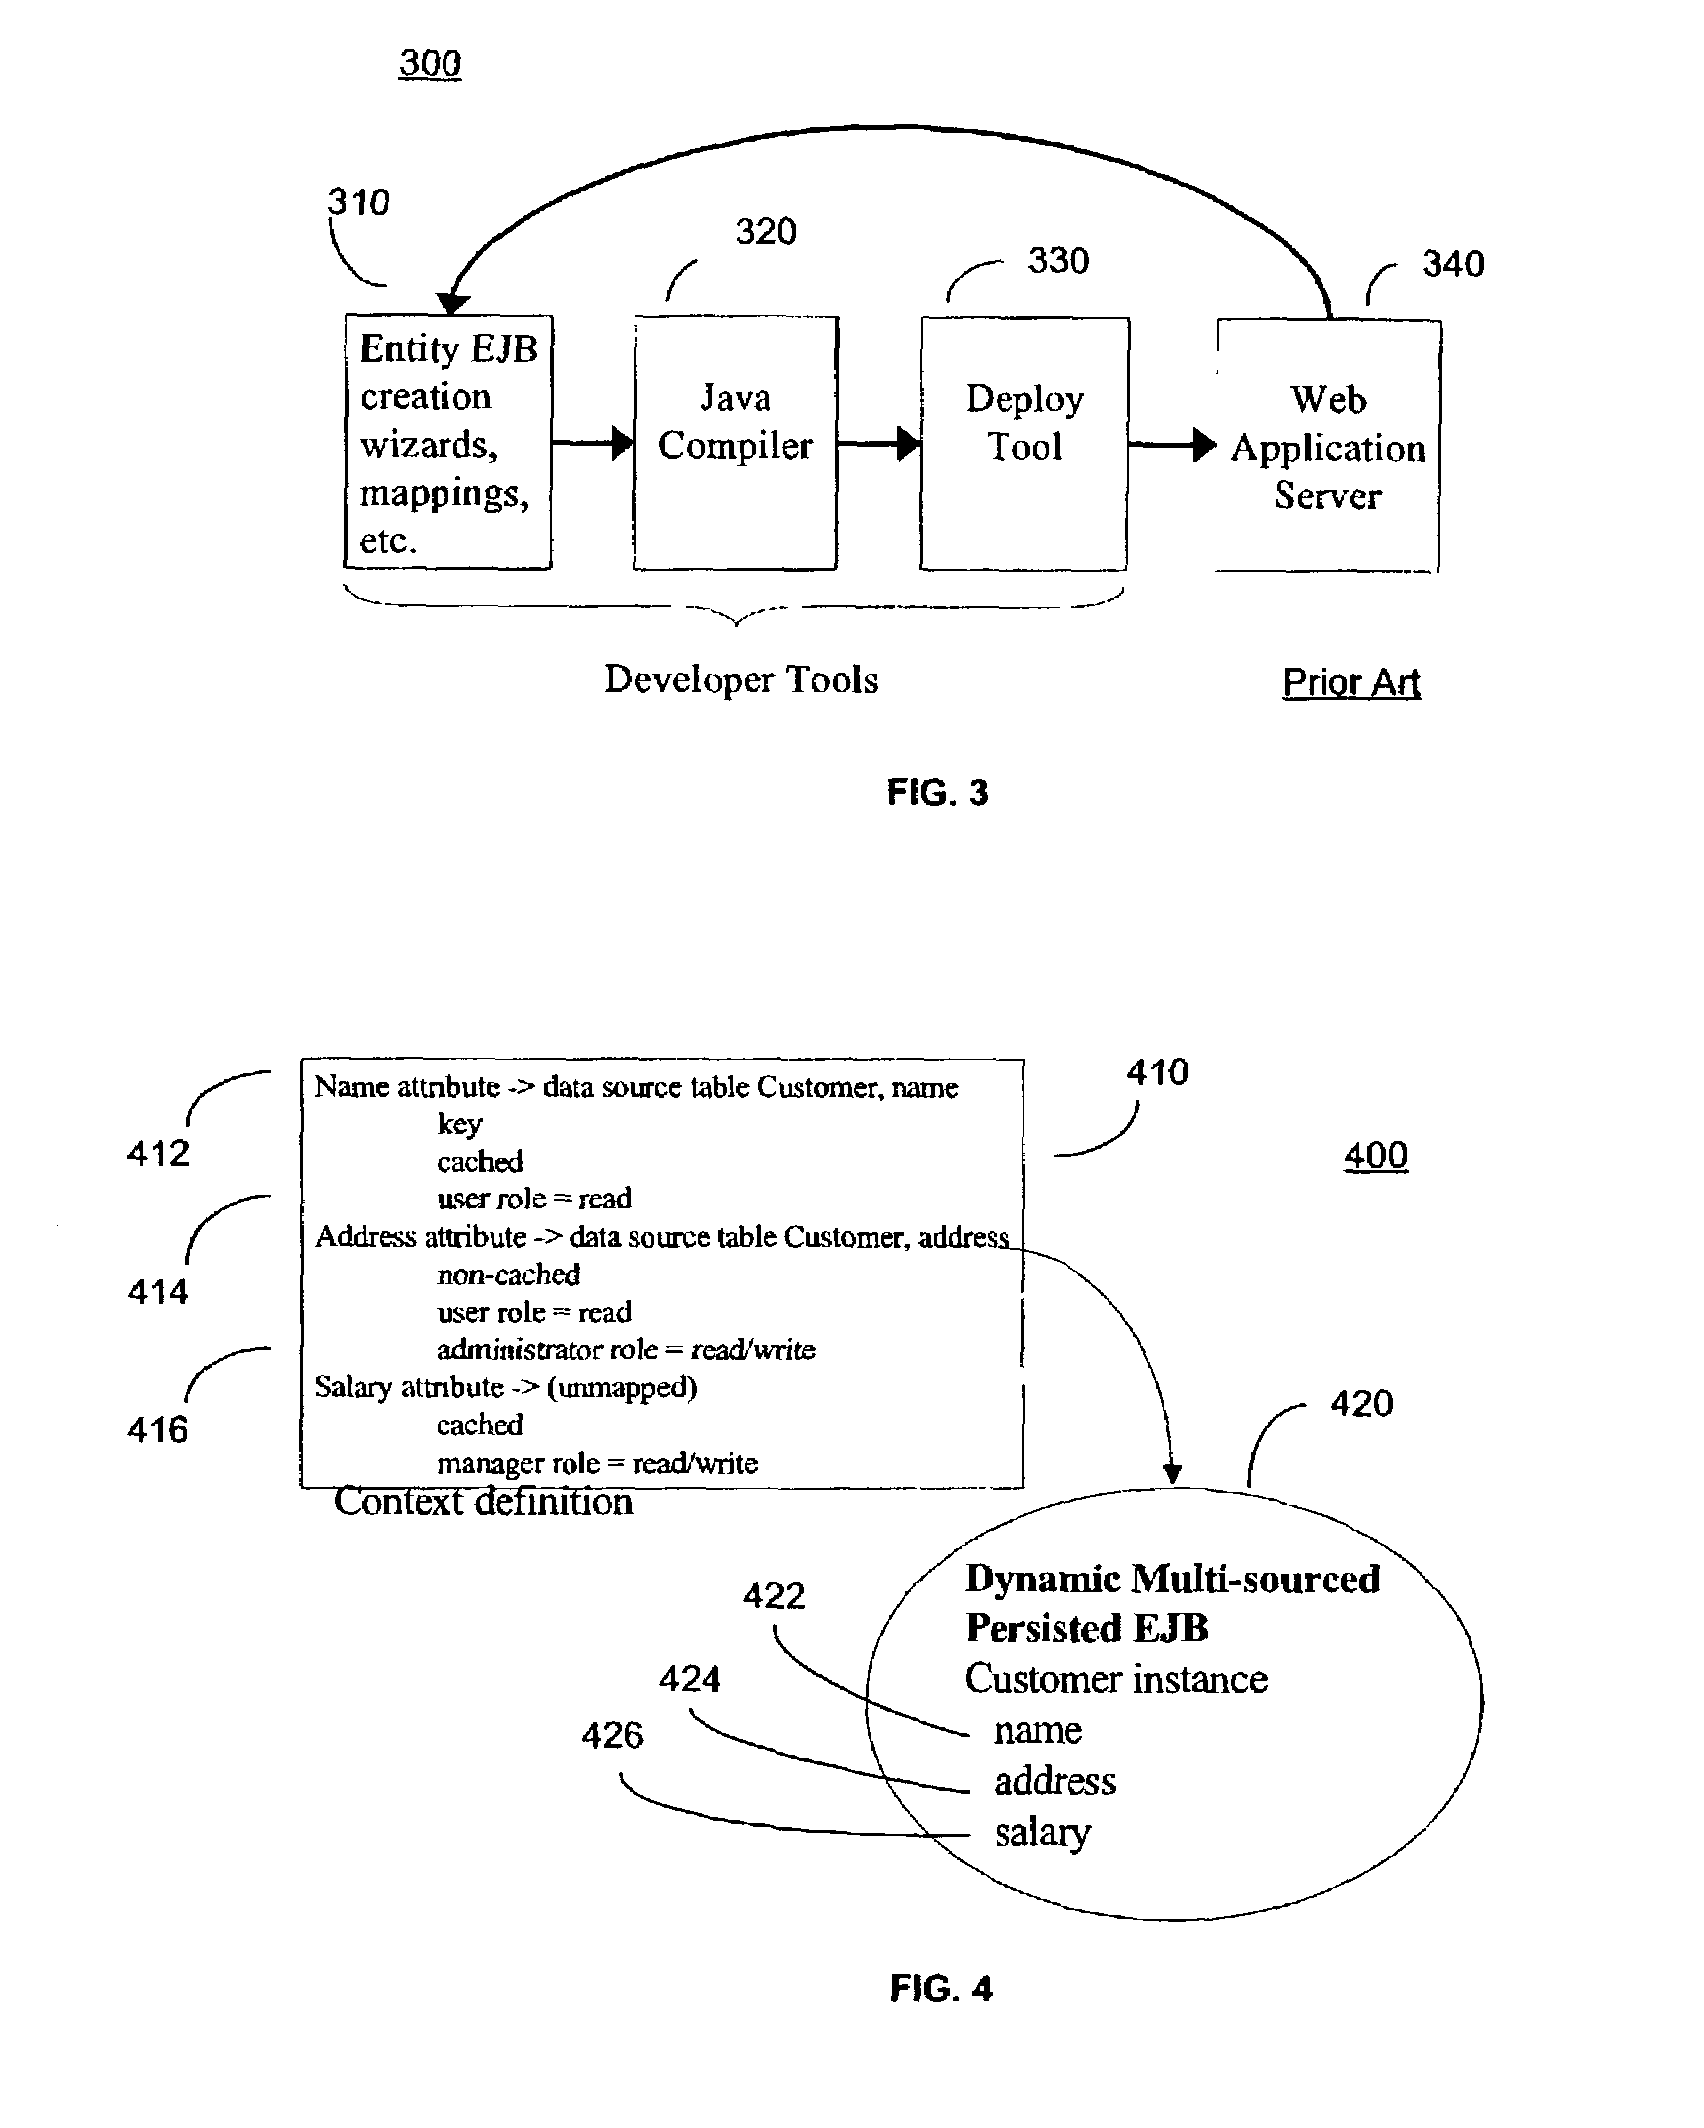 System and method for dynamically mapping dynamic multi-sourced persisted EJBs